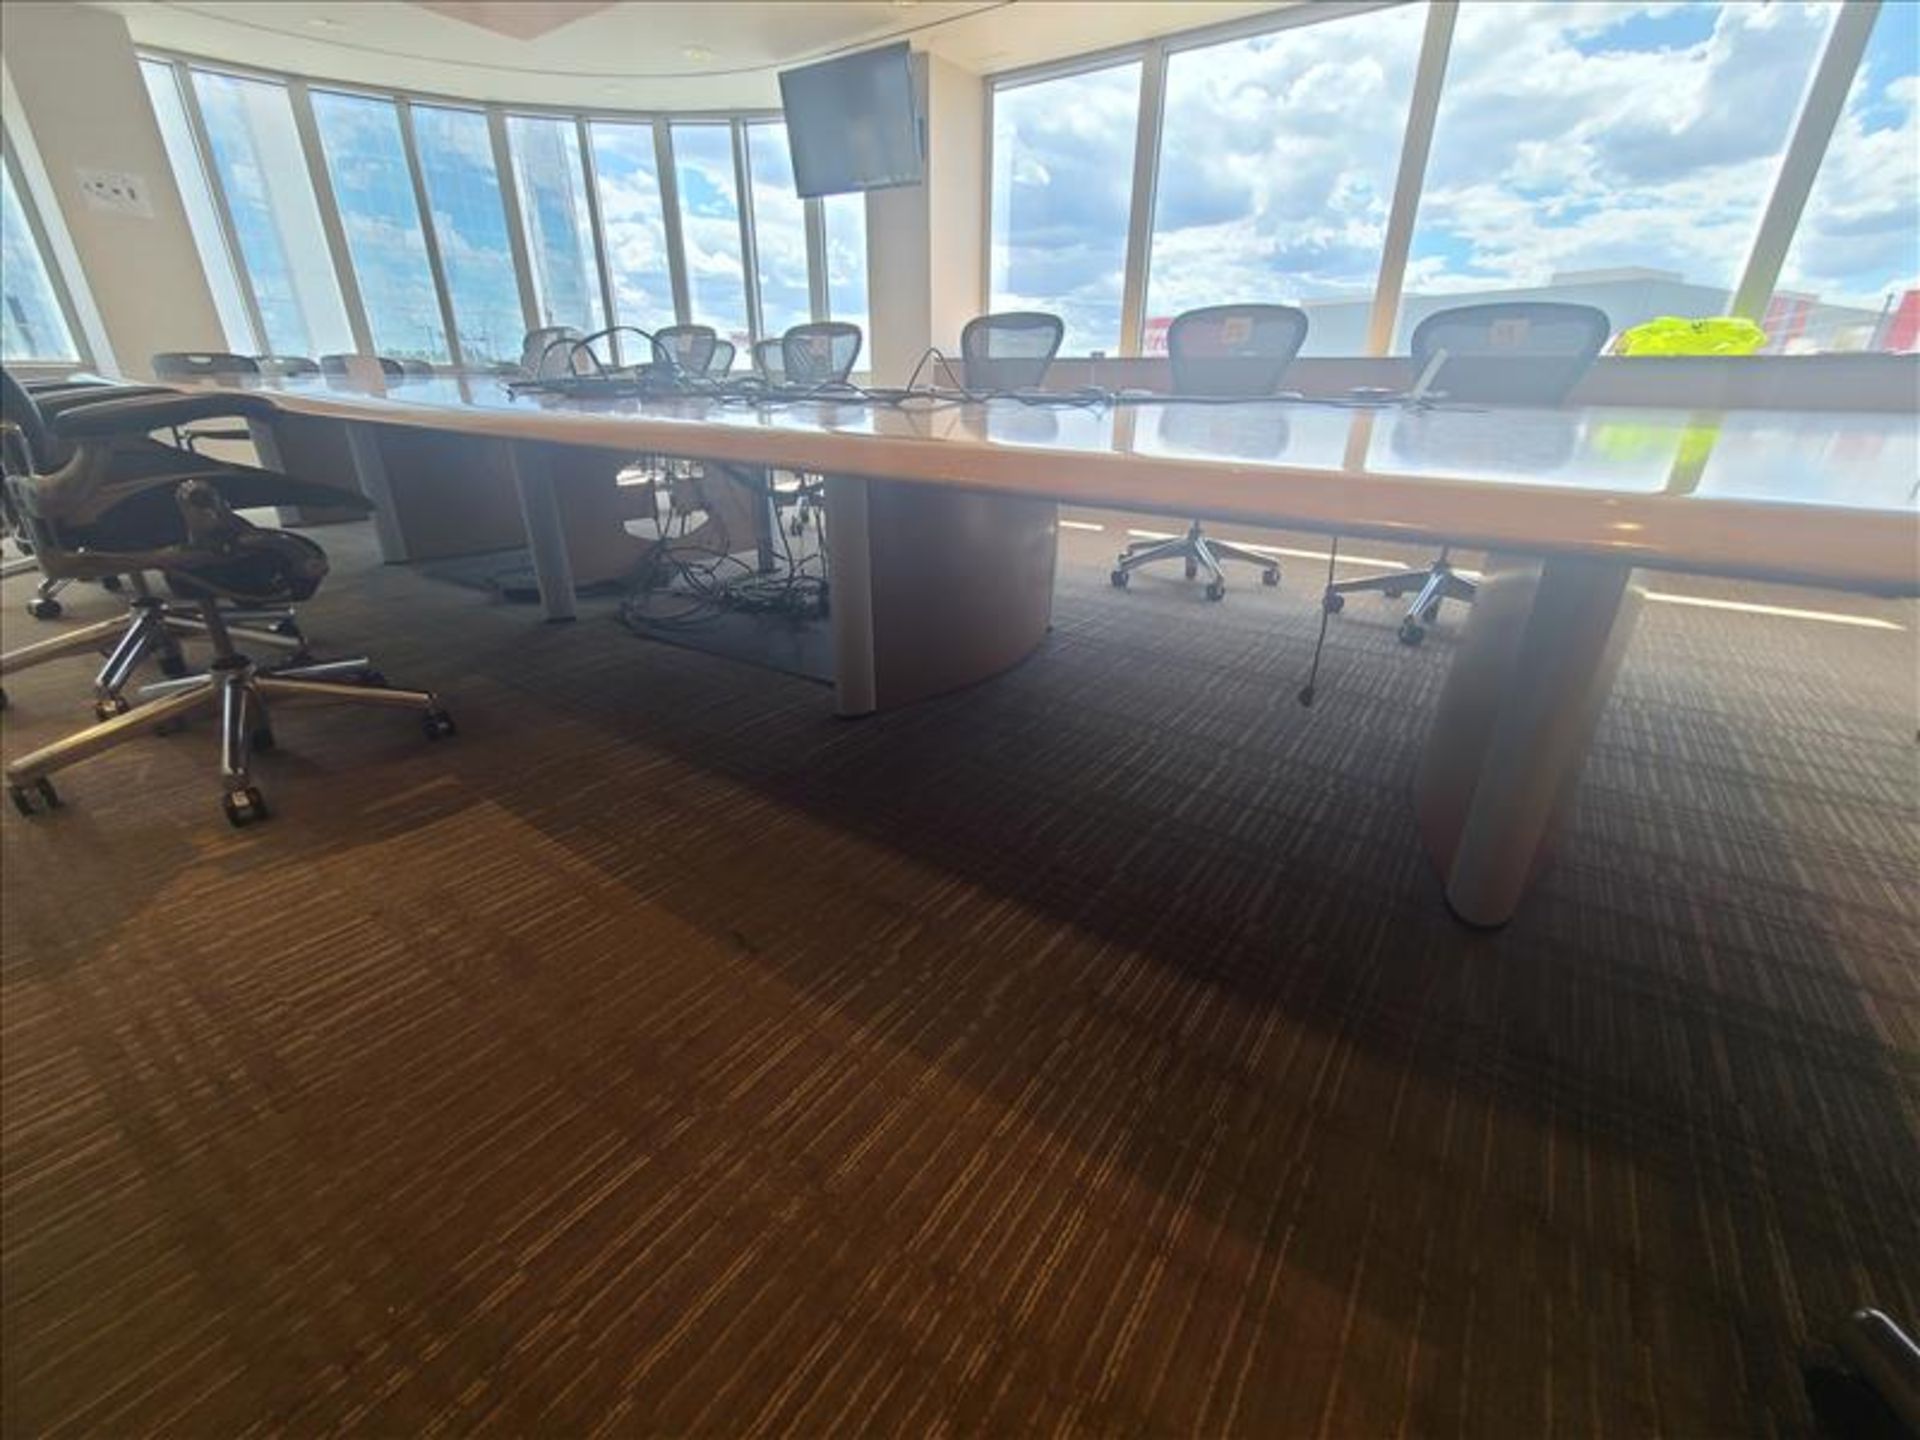 Boardroom Meeting Table approx. 22 ft. x 8 ft., (Qty 1) (Floor 3) (Boardroom 303) - Image 2 of 3